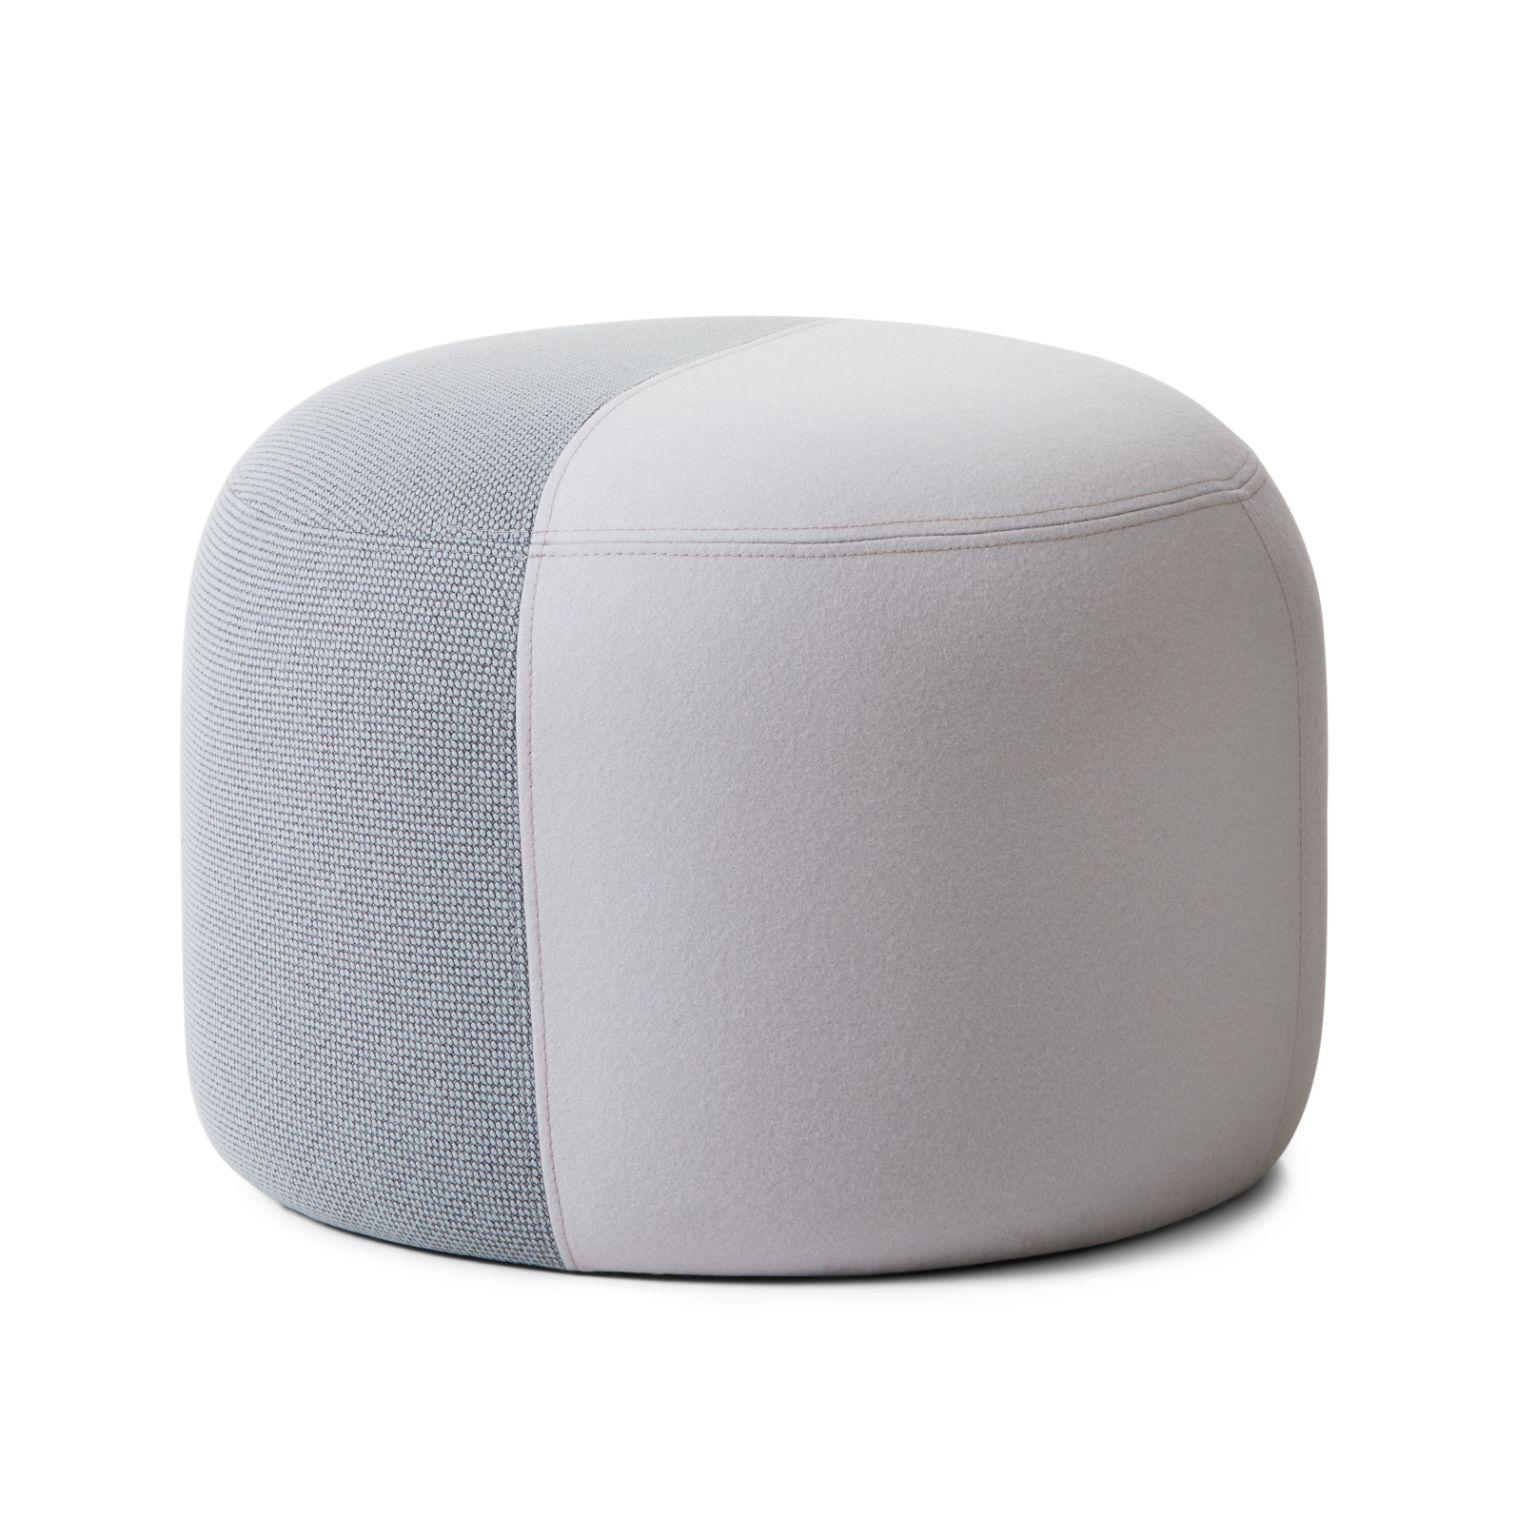 Dainty Pouf minty grey cloudy white by Warm Nordic
Dimensions: D 55 x H 39 cm
Material: Textile upholstery, Wooden frame, foam.
Weight: 9.5 kg
Also available in different colours and finishes.

Sophisticated, two-coloured pouf with soft shapes and a